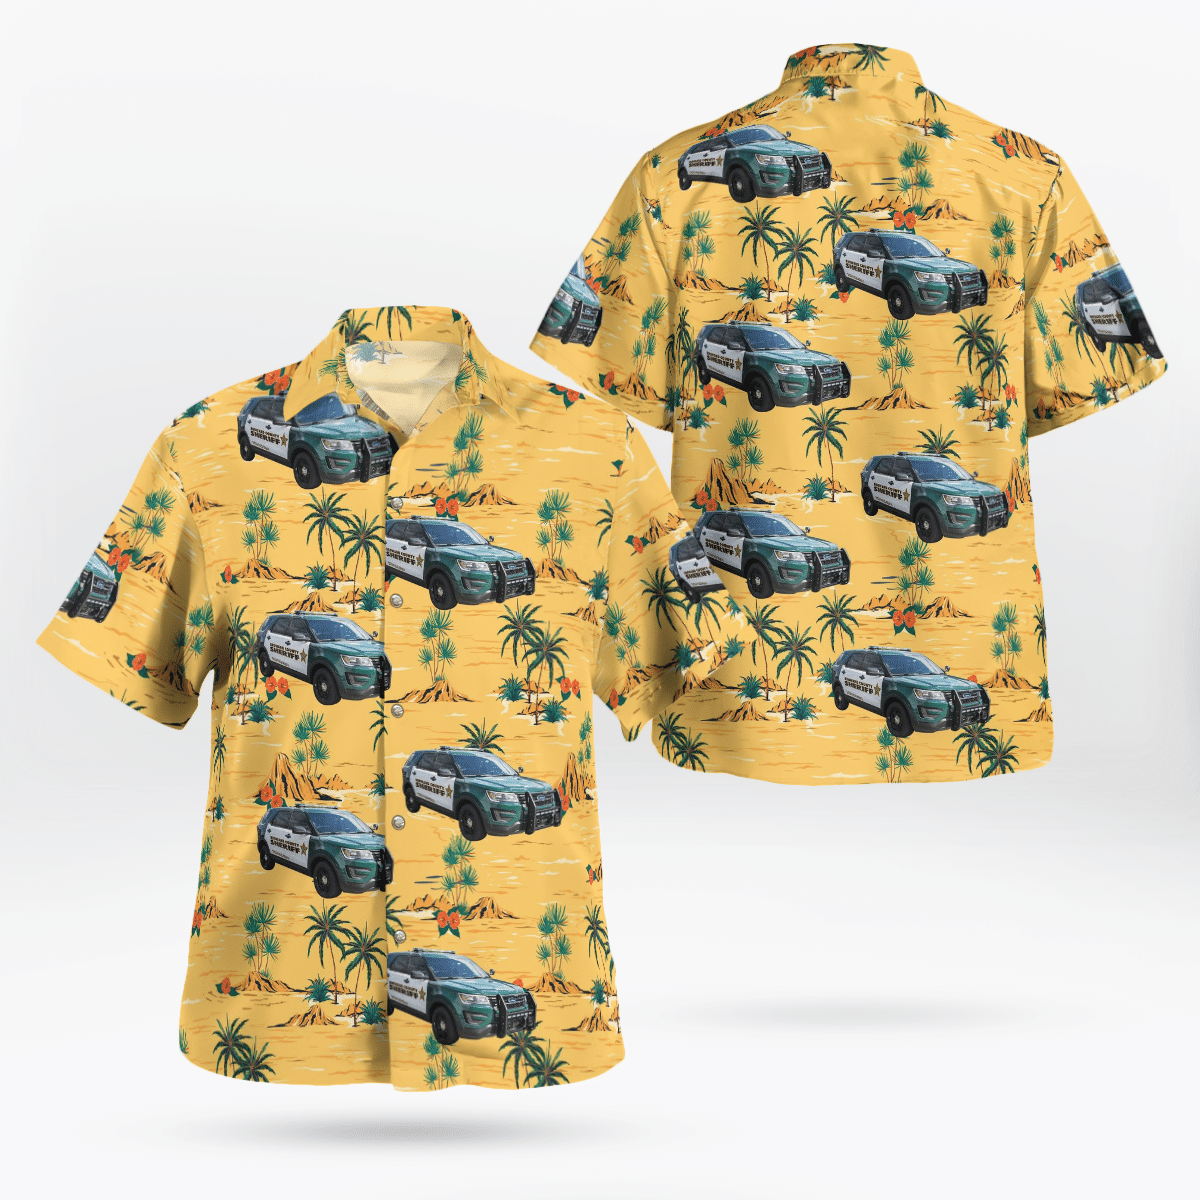 Consider getting these Hawaiian Shirt for your friends 47